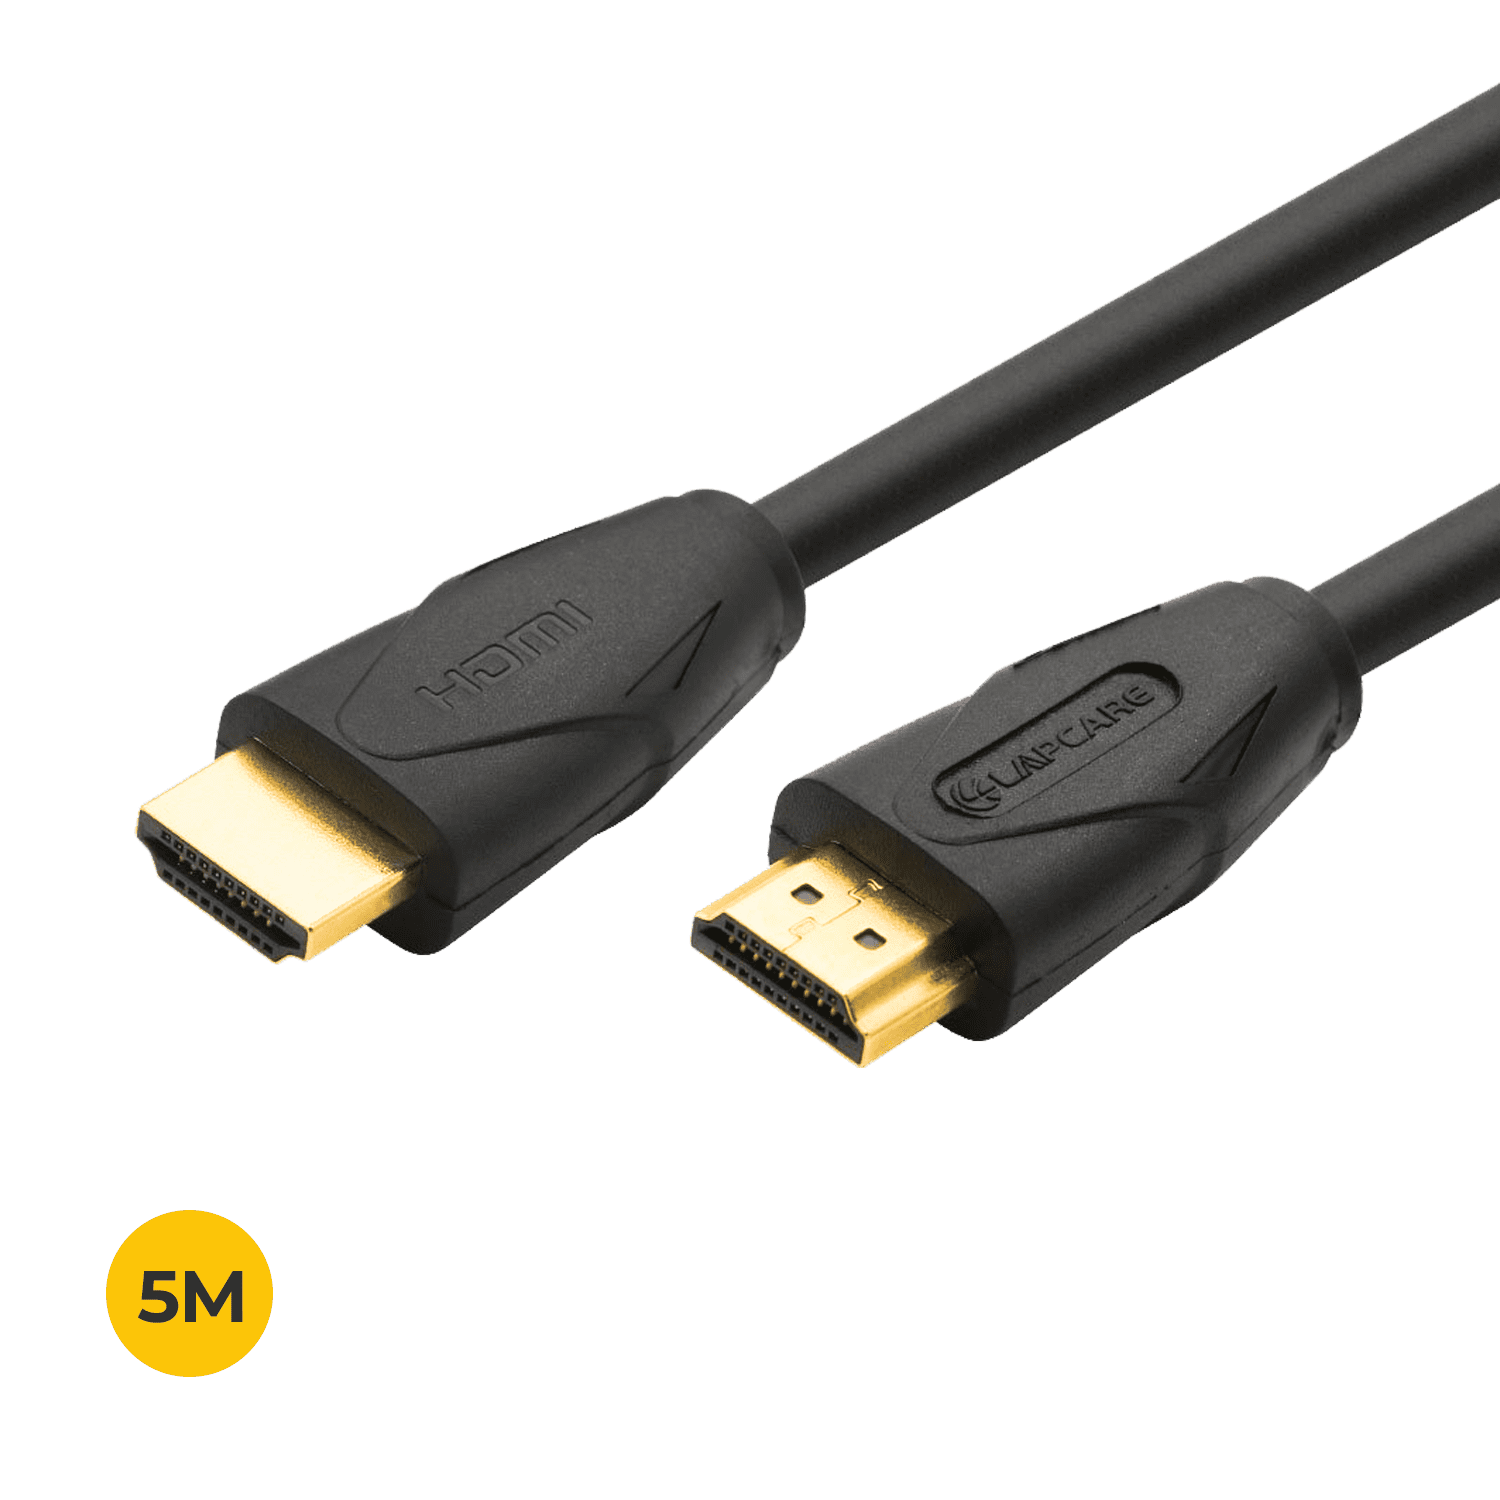 Lapcare high speed HDMI 1.4 cable with Ethernet +3D True Ultra HD (5M) –